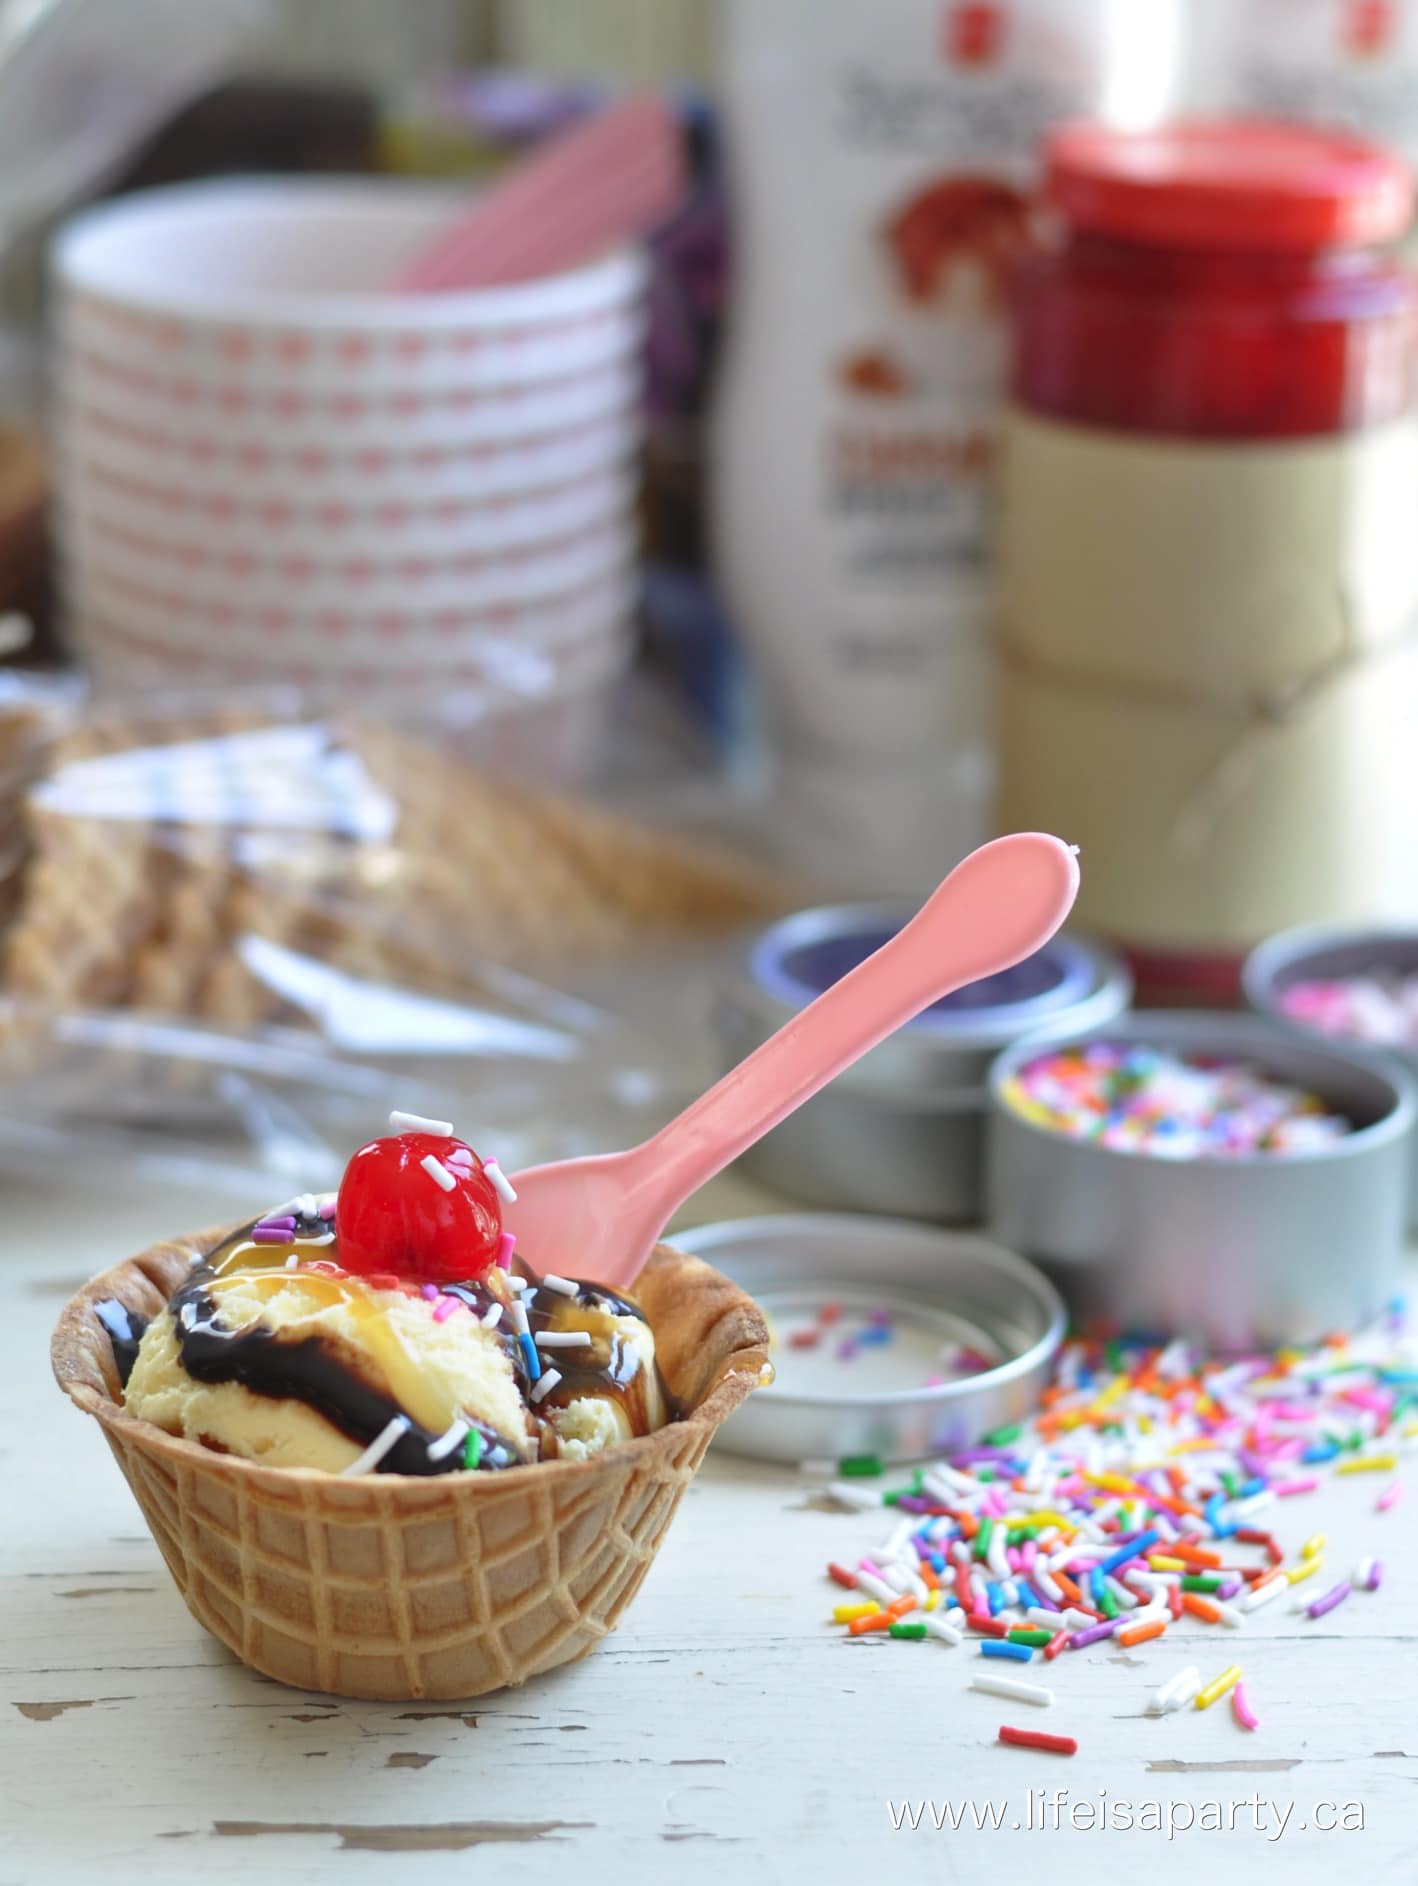 Ice Cream Sundae Kit: Perfect for summer gift giving. Wrap up your favourite ice cream toppings, sauces, cherries, ice cream cones, and ice cream.